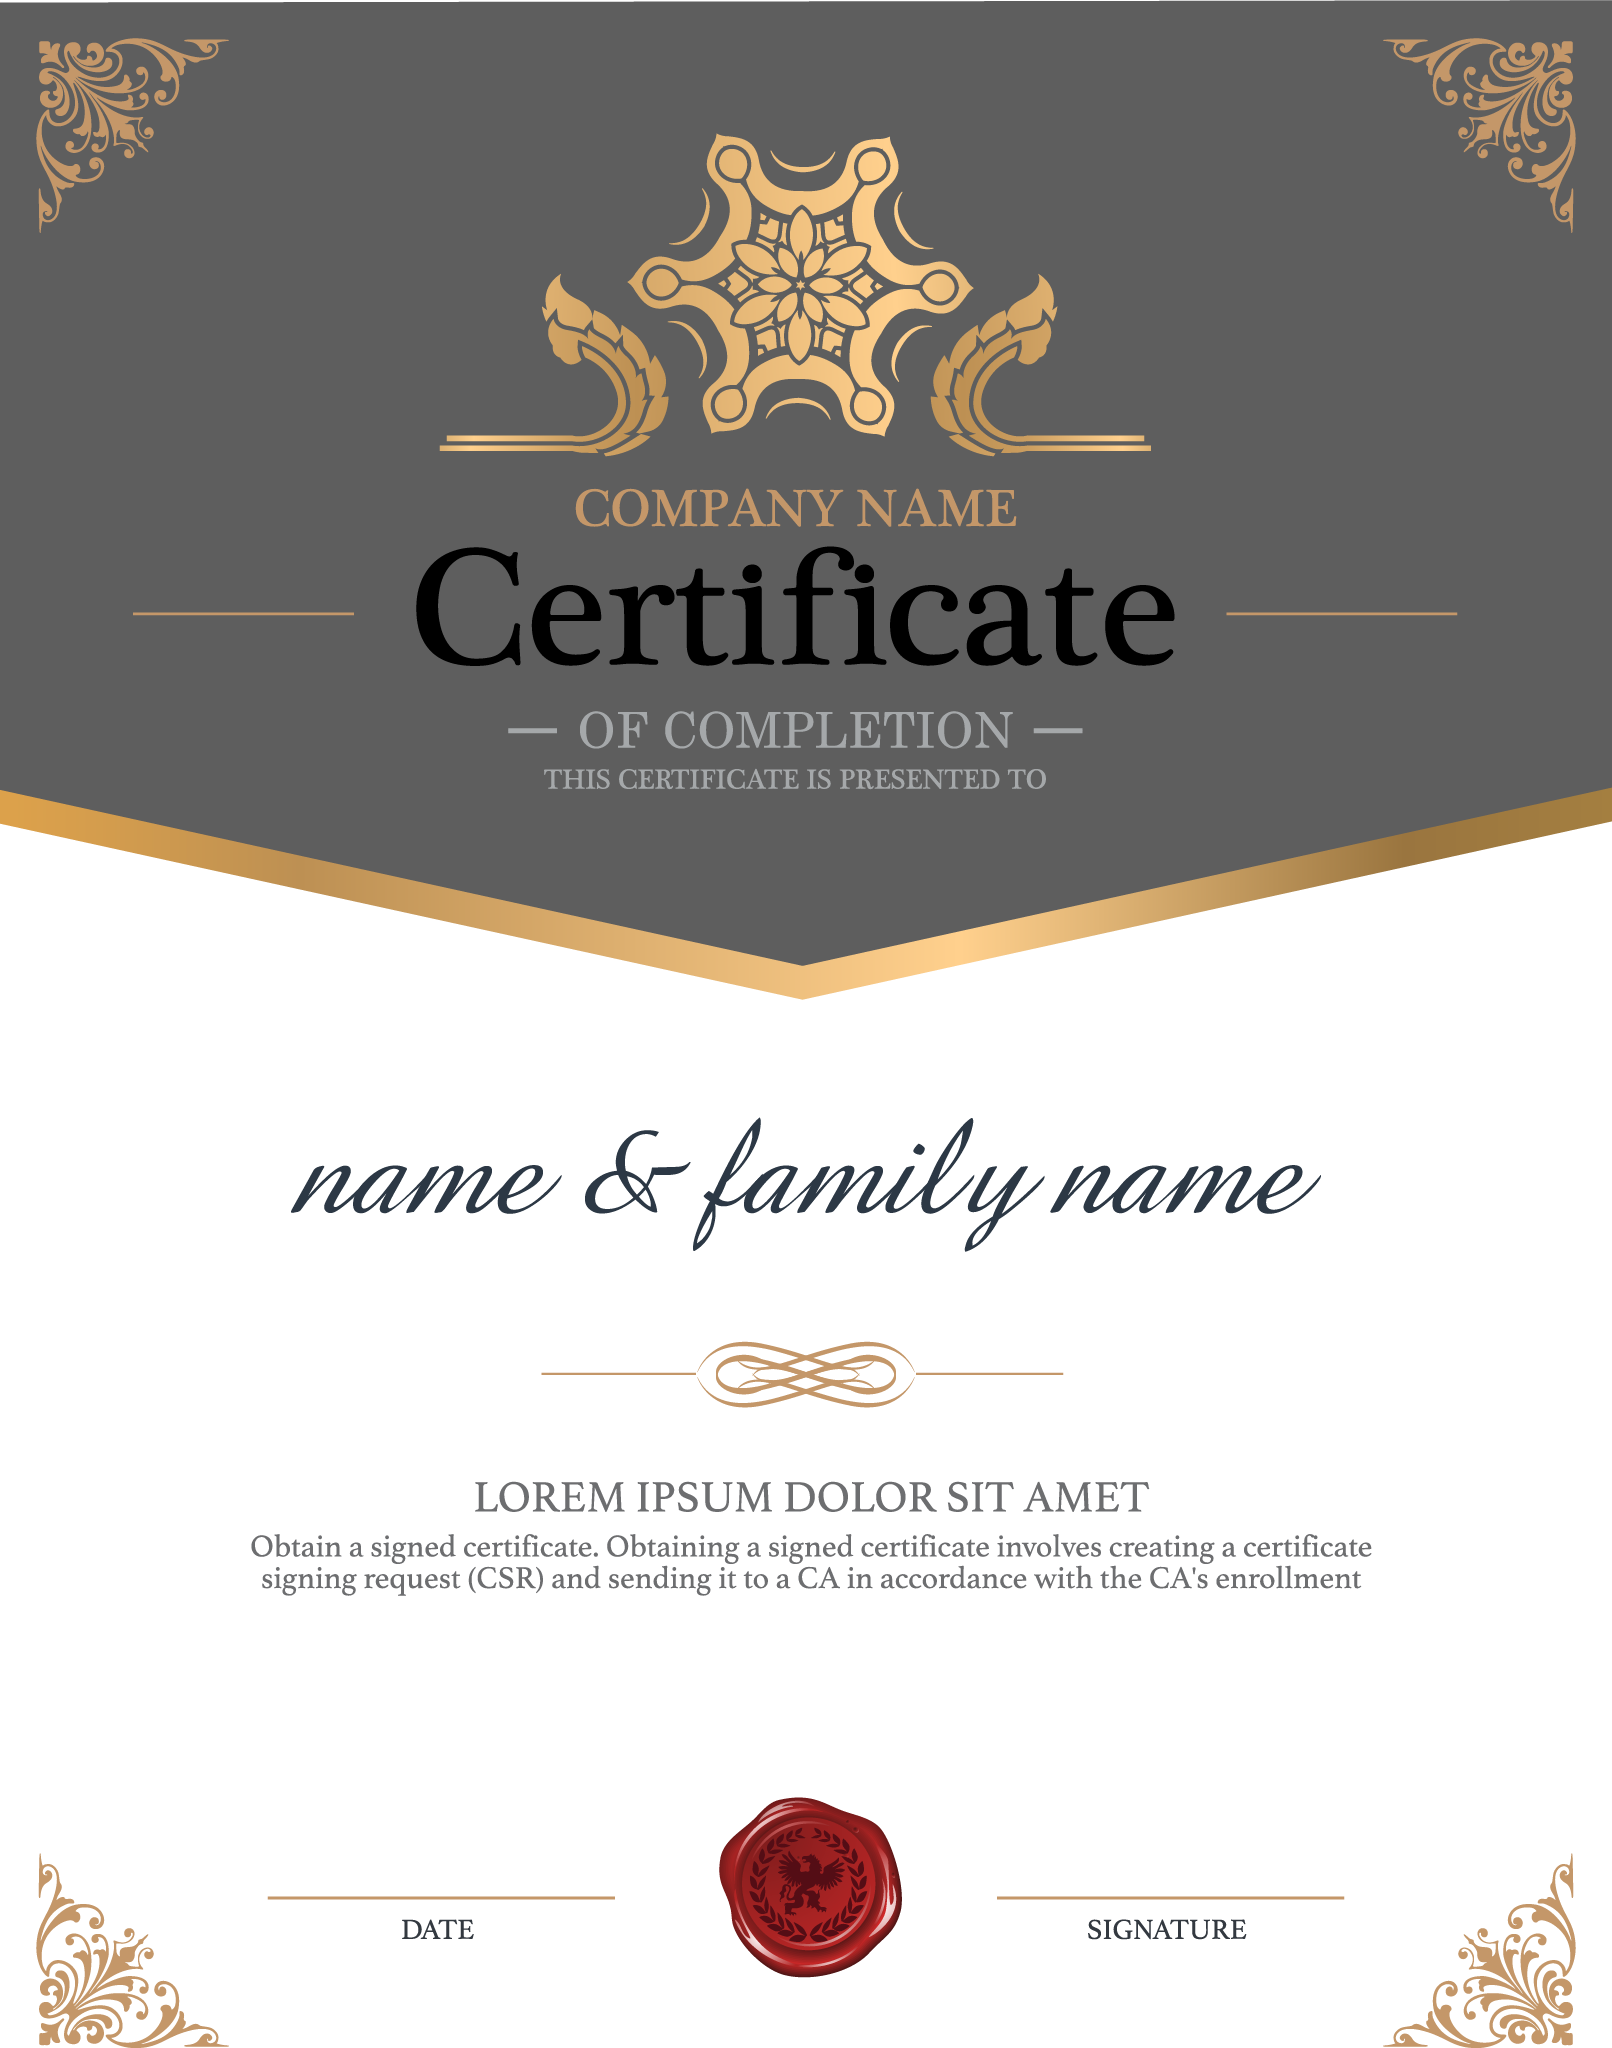 Certificate Background PNG